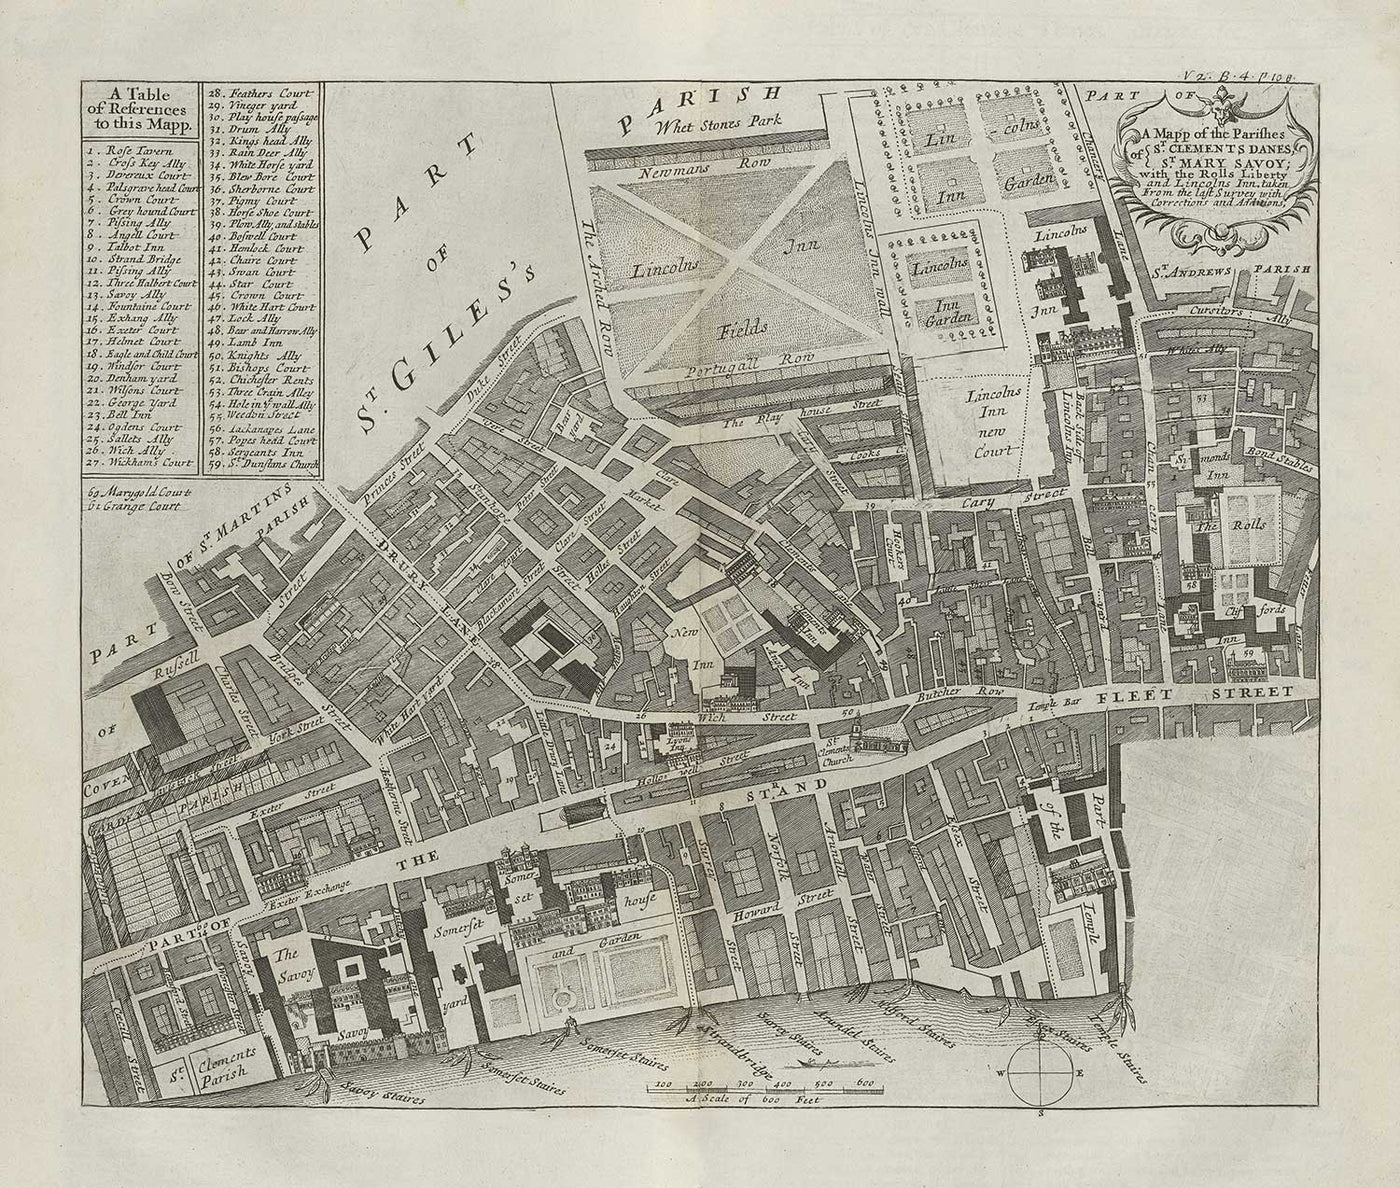 Old Map of St Mary Savoy, 1720 by Strype and Stow - London, Holborn, Strand, Fleet Street, River Thames